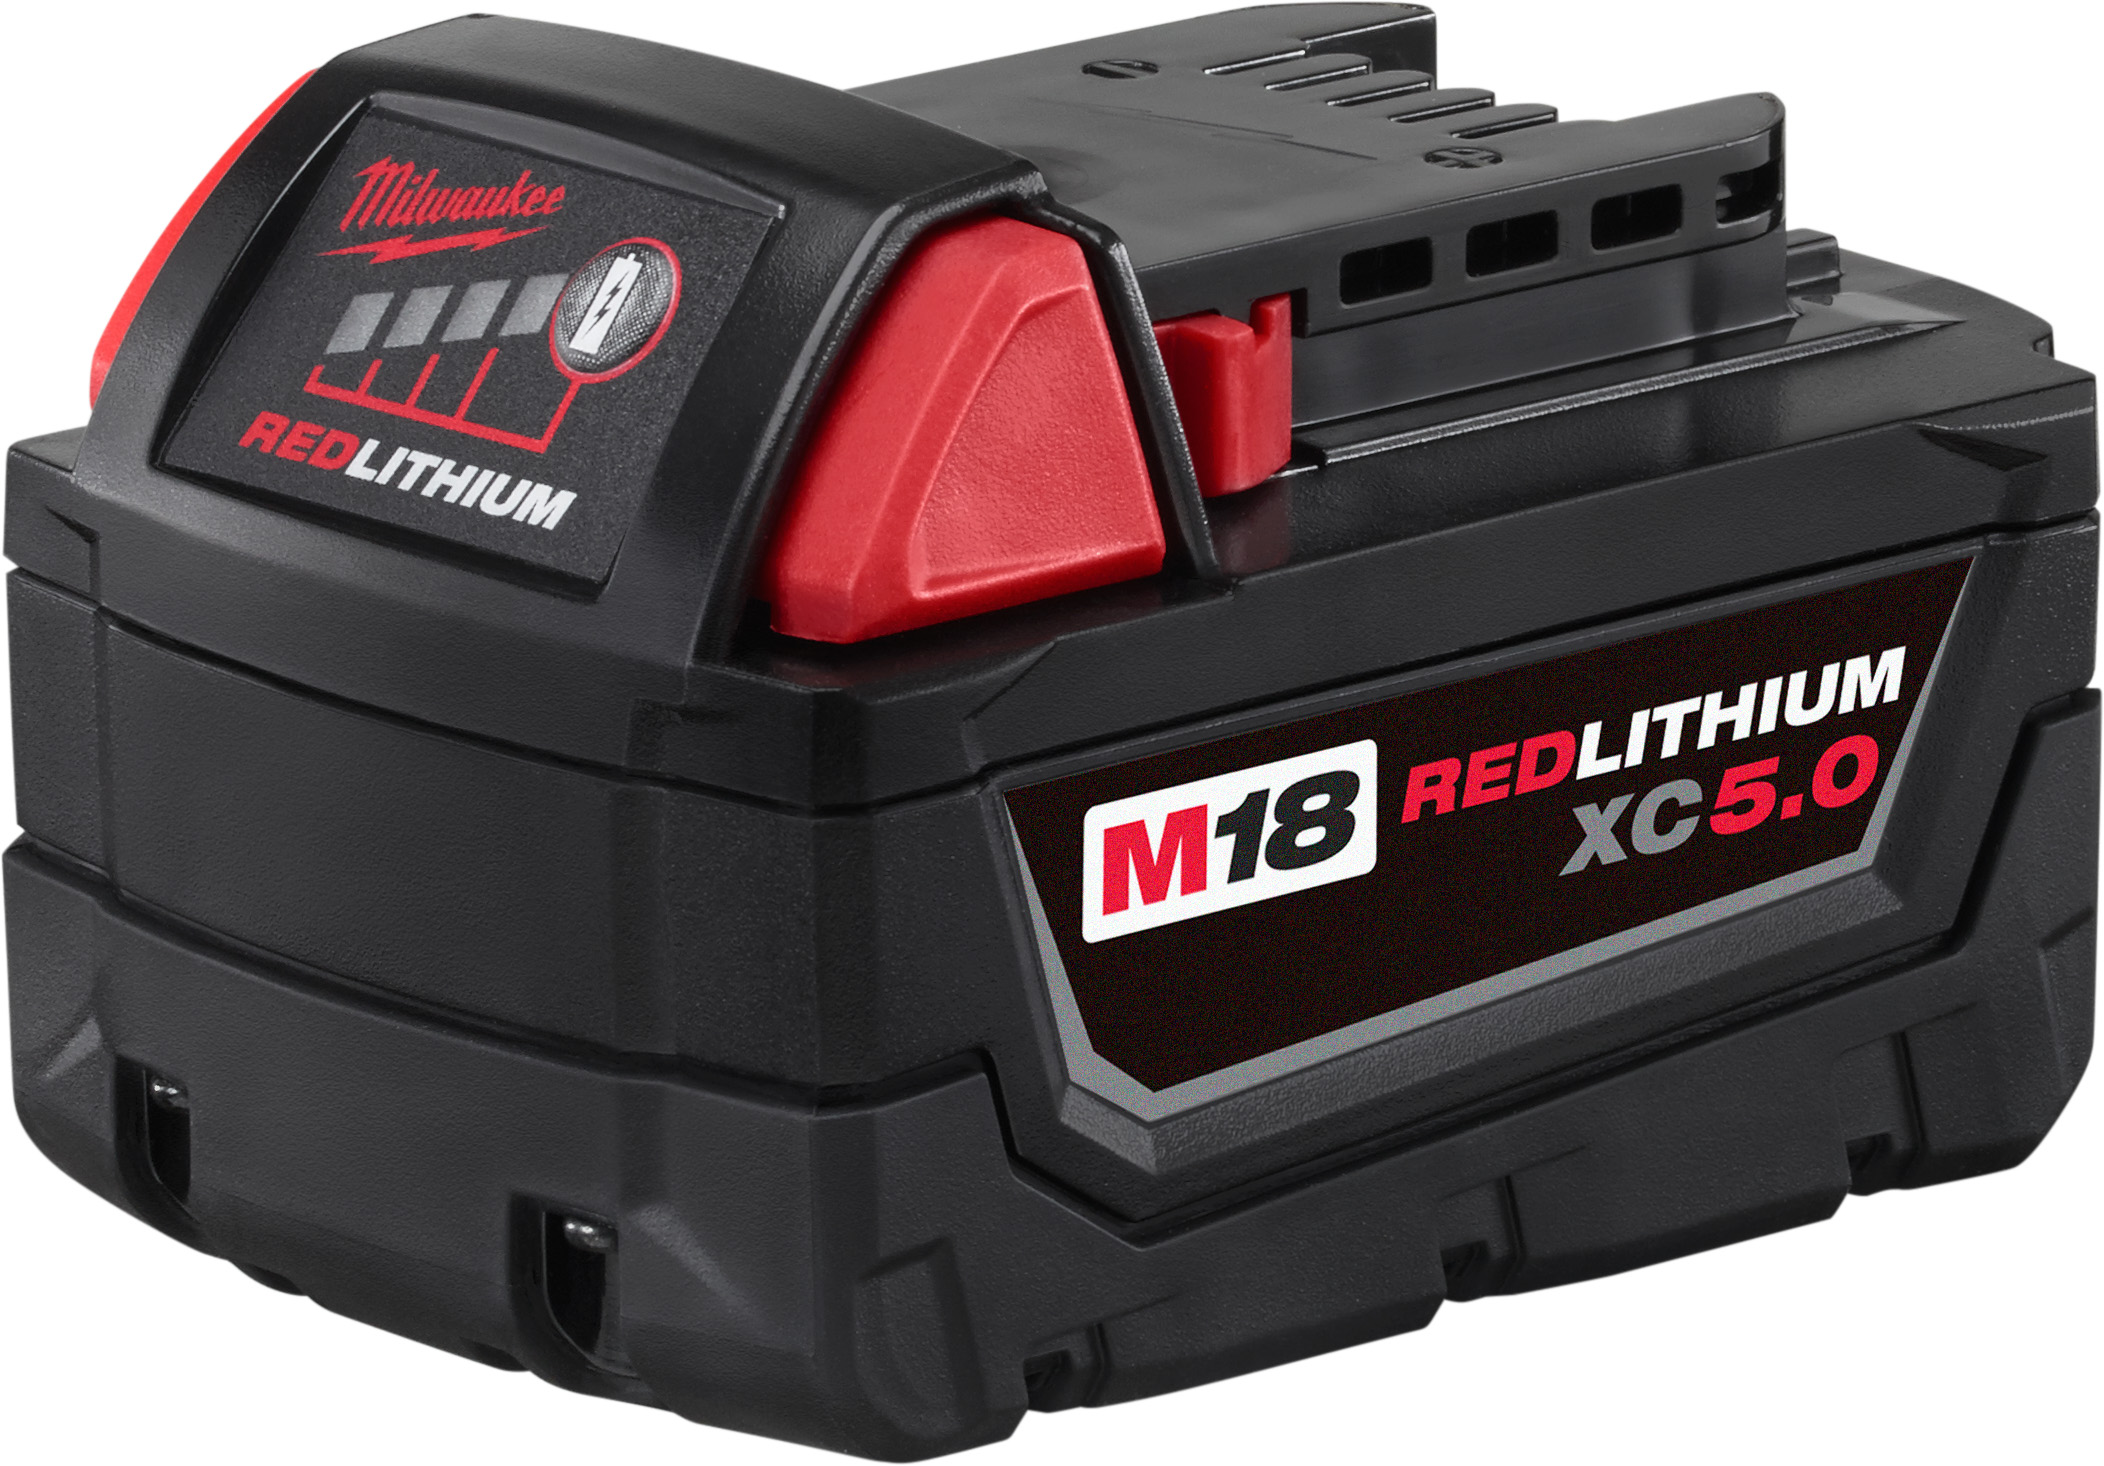 Delivers up to 2.5X more run-time, 20% more power and 2X more life than standard lithium-ion batteries. The M18™ REDLITHIUM™ XC 5.0 extended capacity battery pack features superior pack construction, electronics, and performance to deliver more work per charge and more work over the life of the pack than any battery on the market.